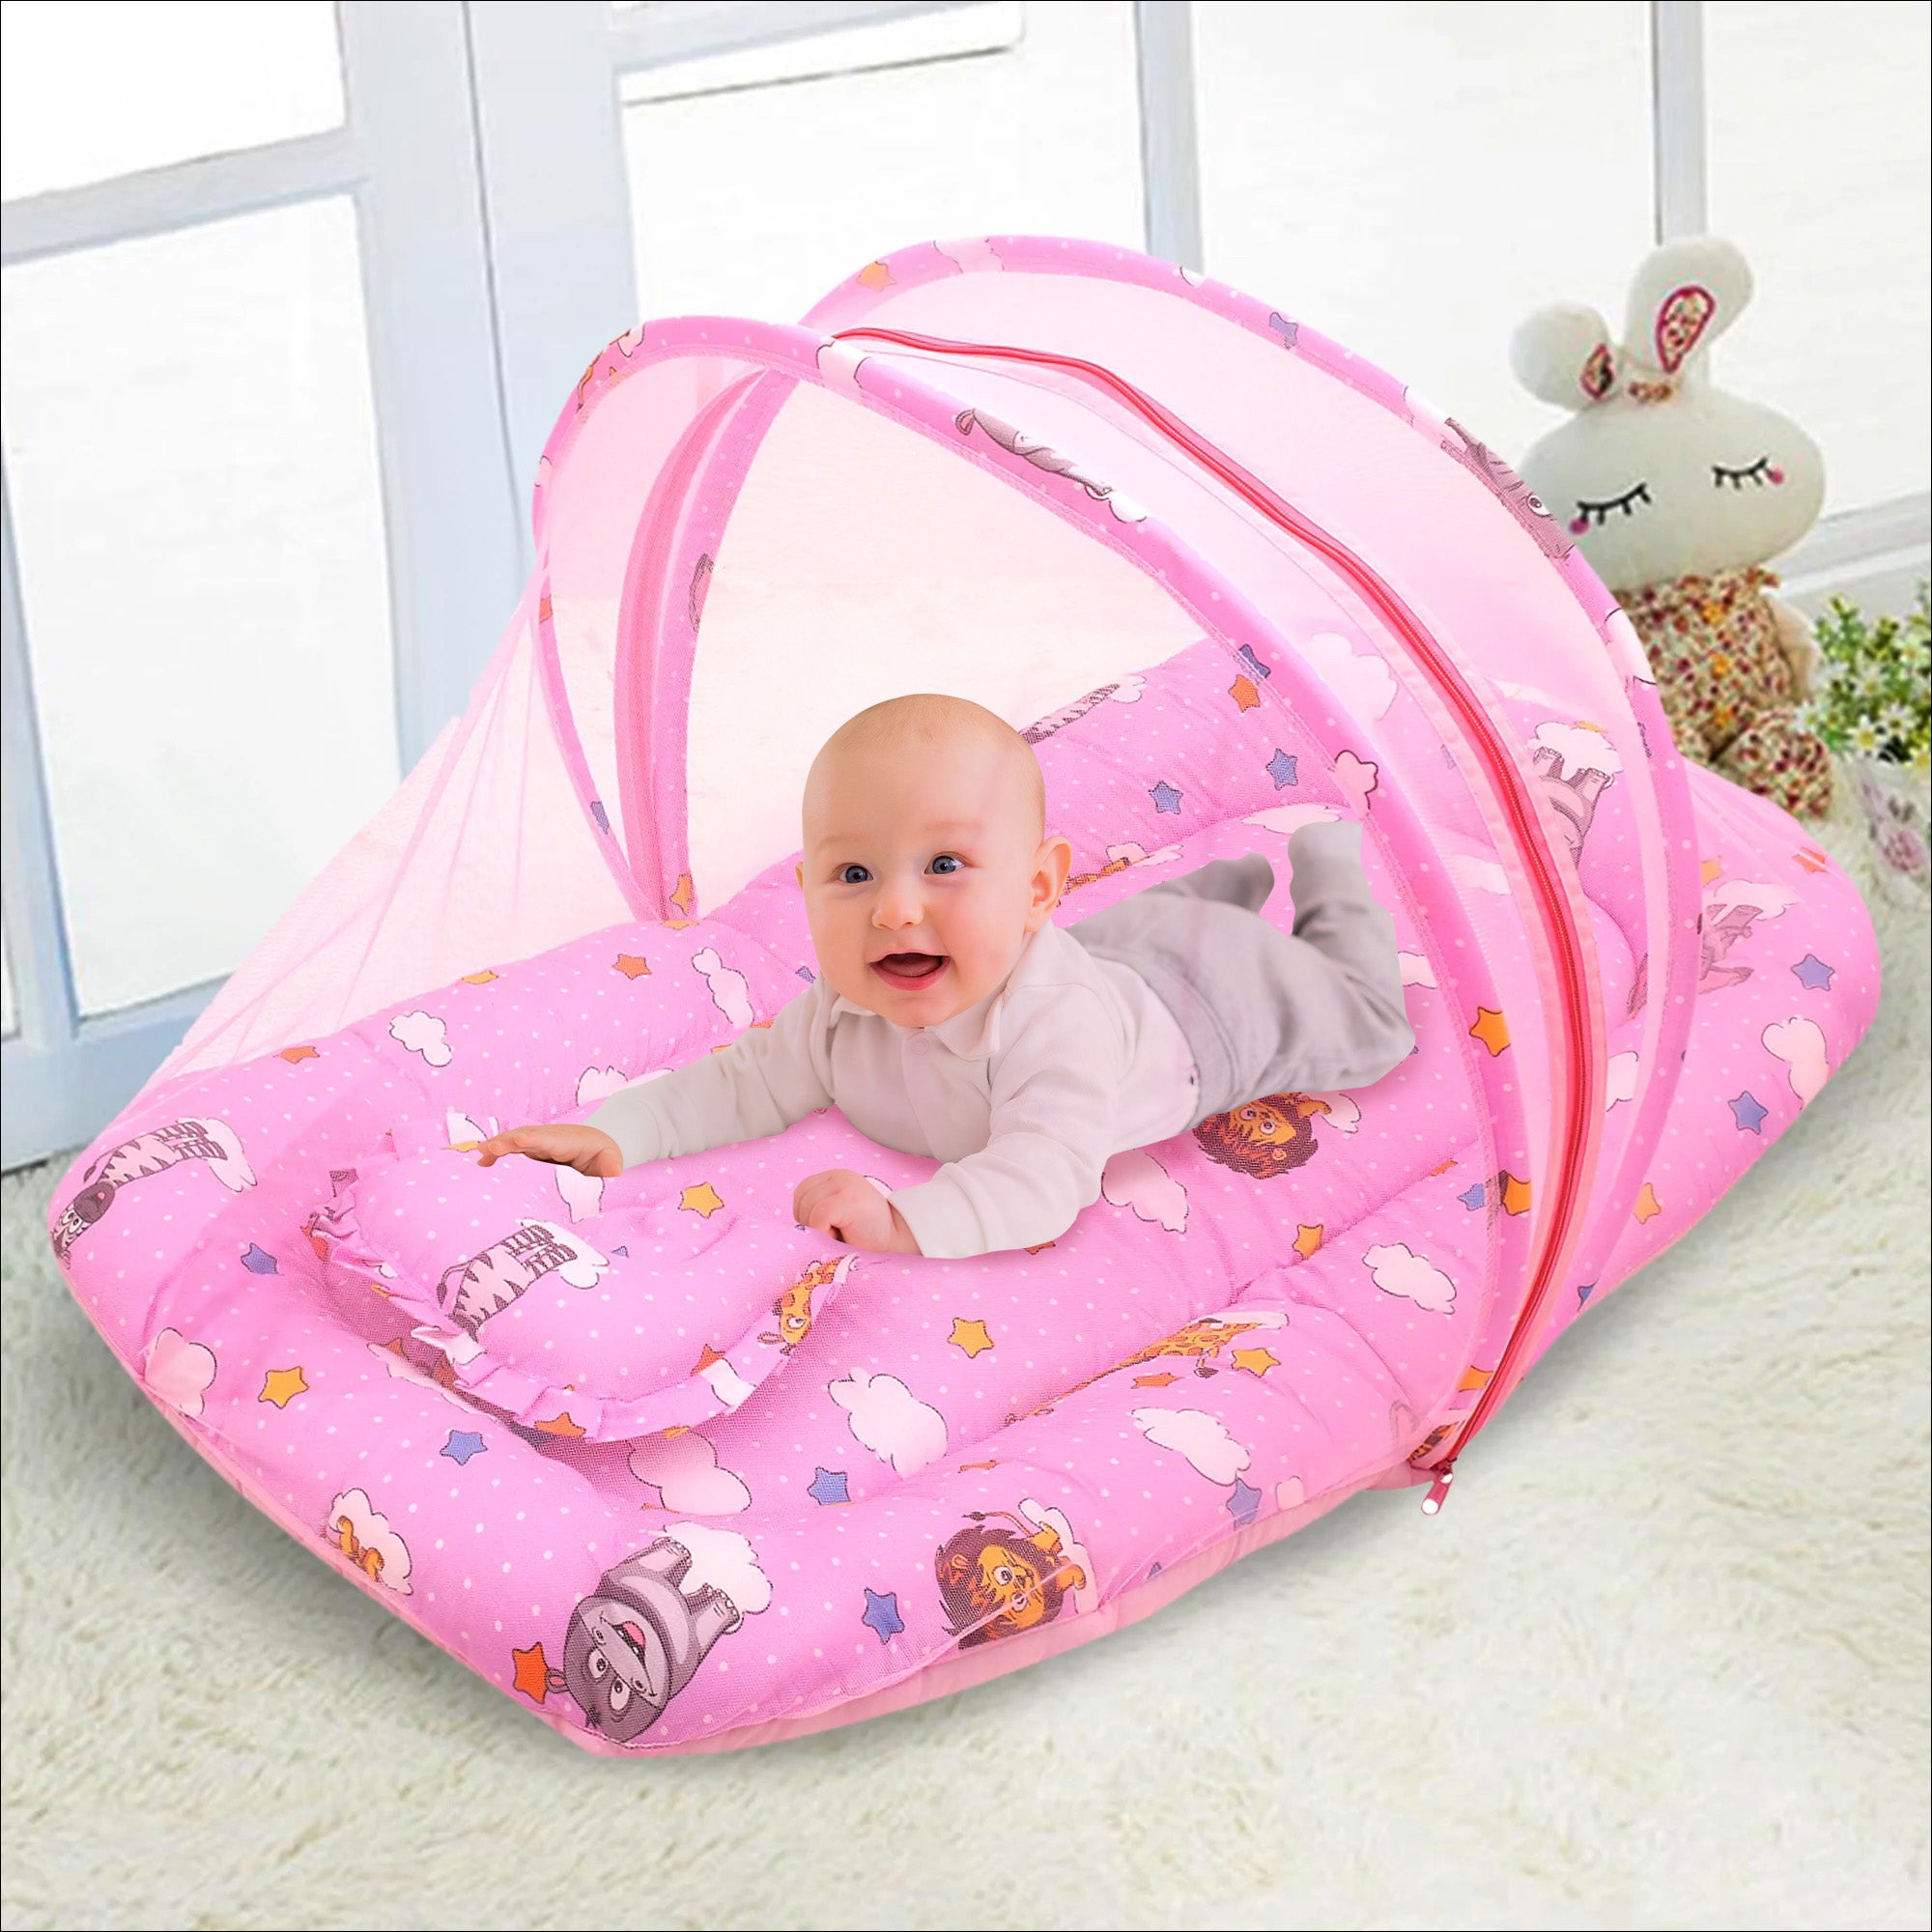 Mosquito Net Tent Mattress Set With Neck Pillow Flying Animals Pink